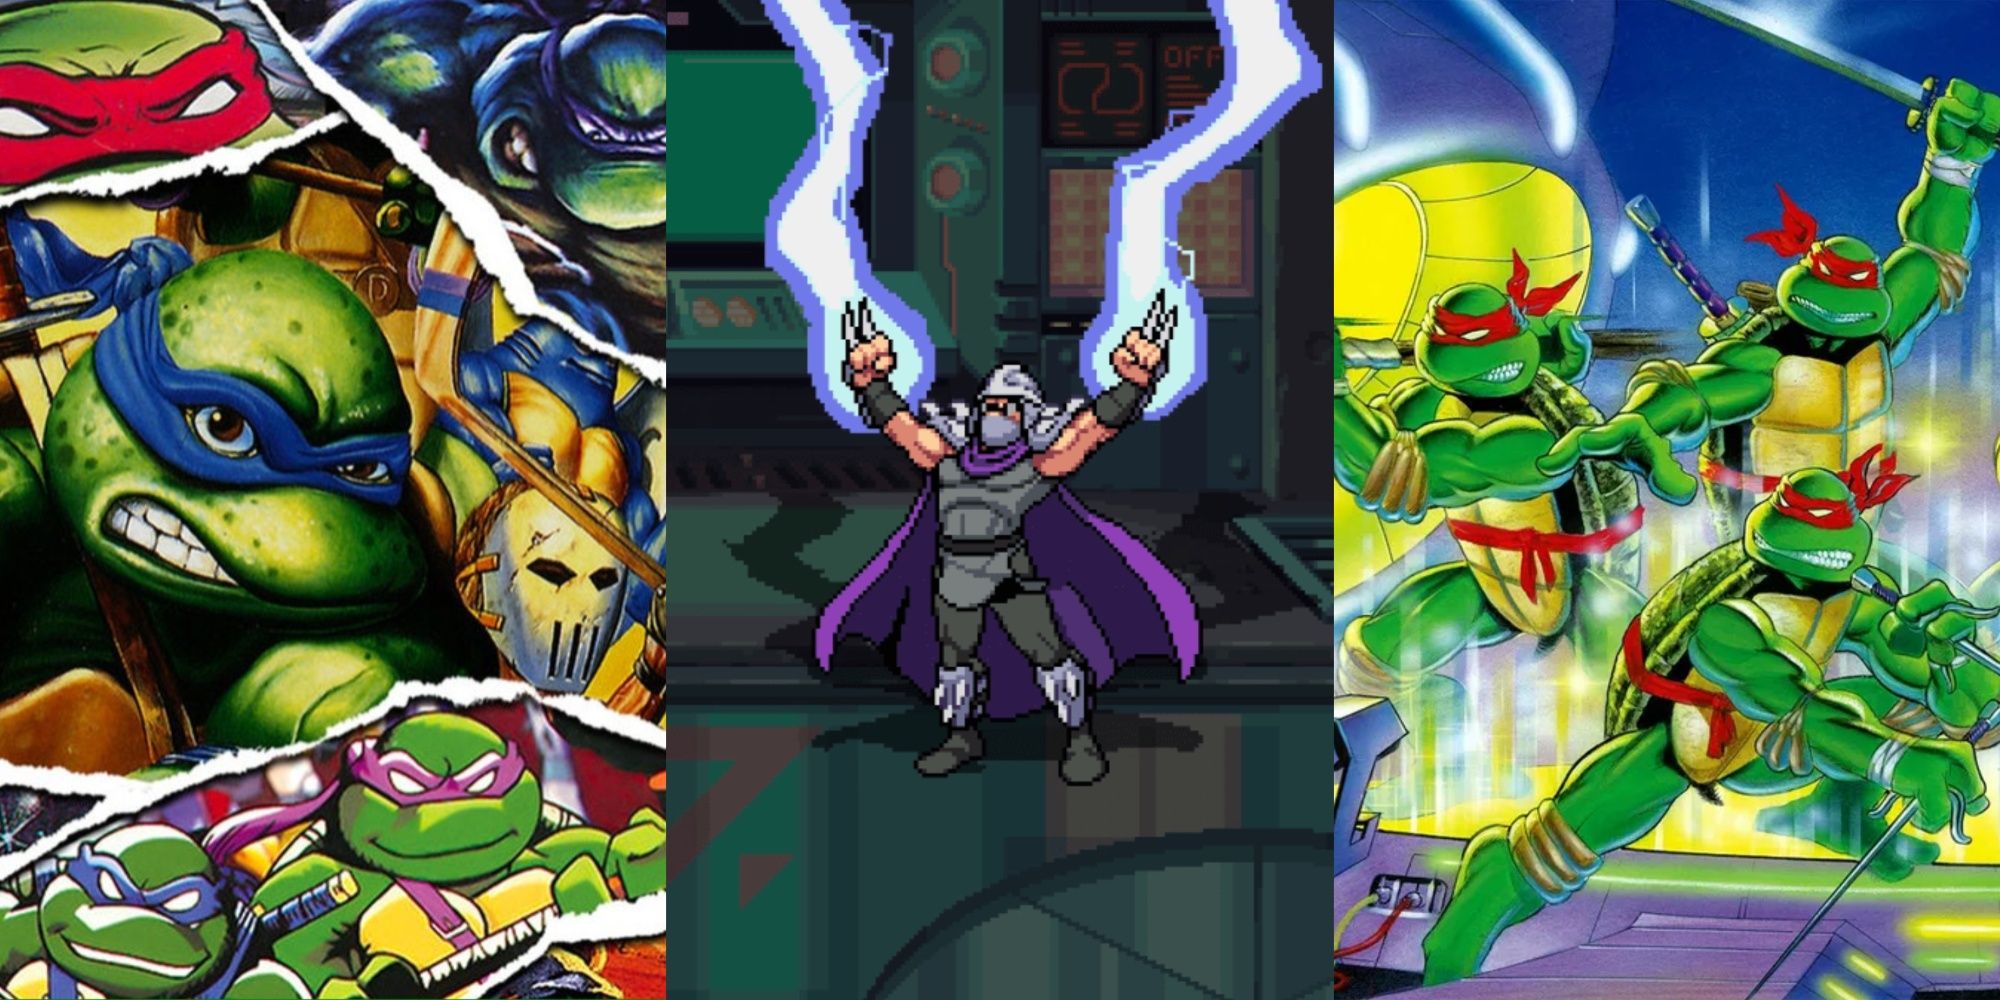 TMNT games side by side, featuring the turtles, shredder, and the best games available